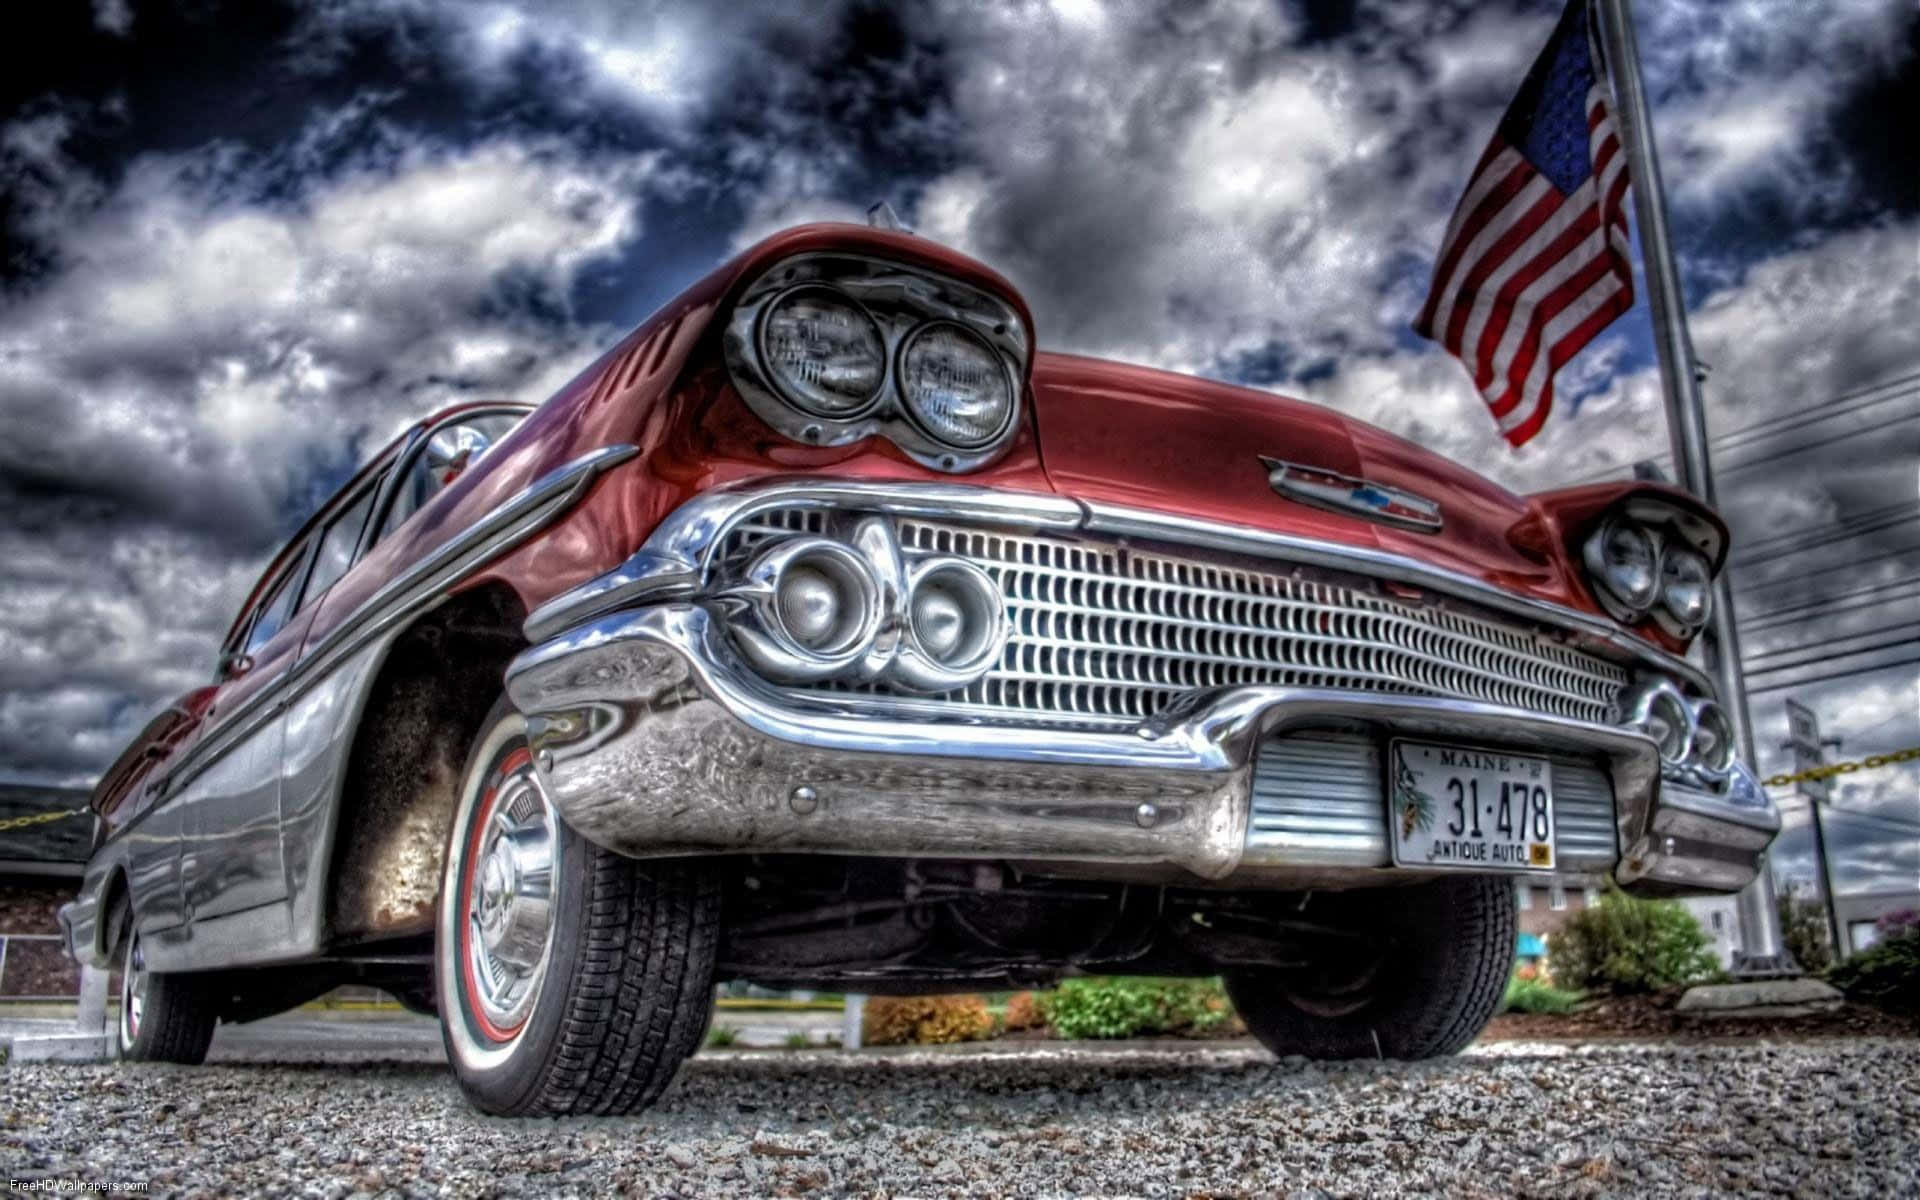 A Classic Car Parked In Front Of A Cloudy Sky